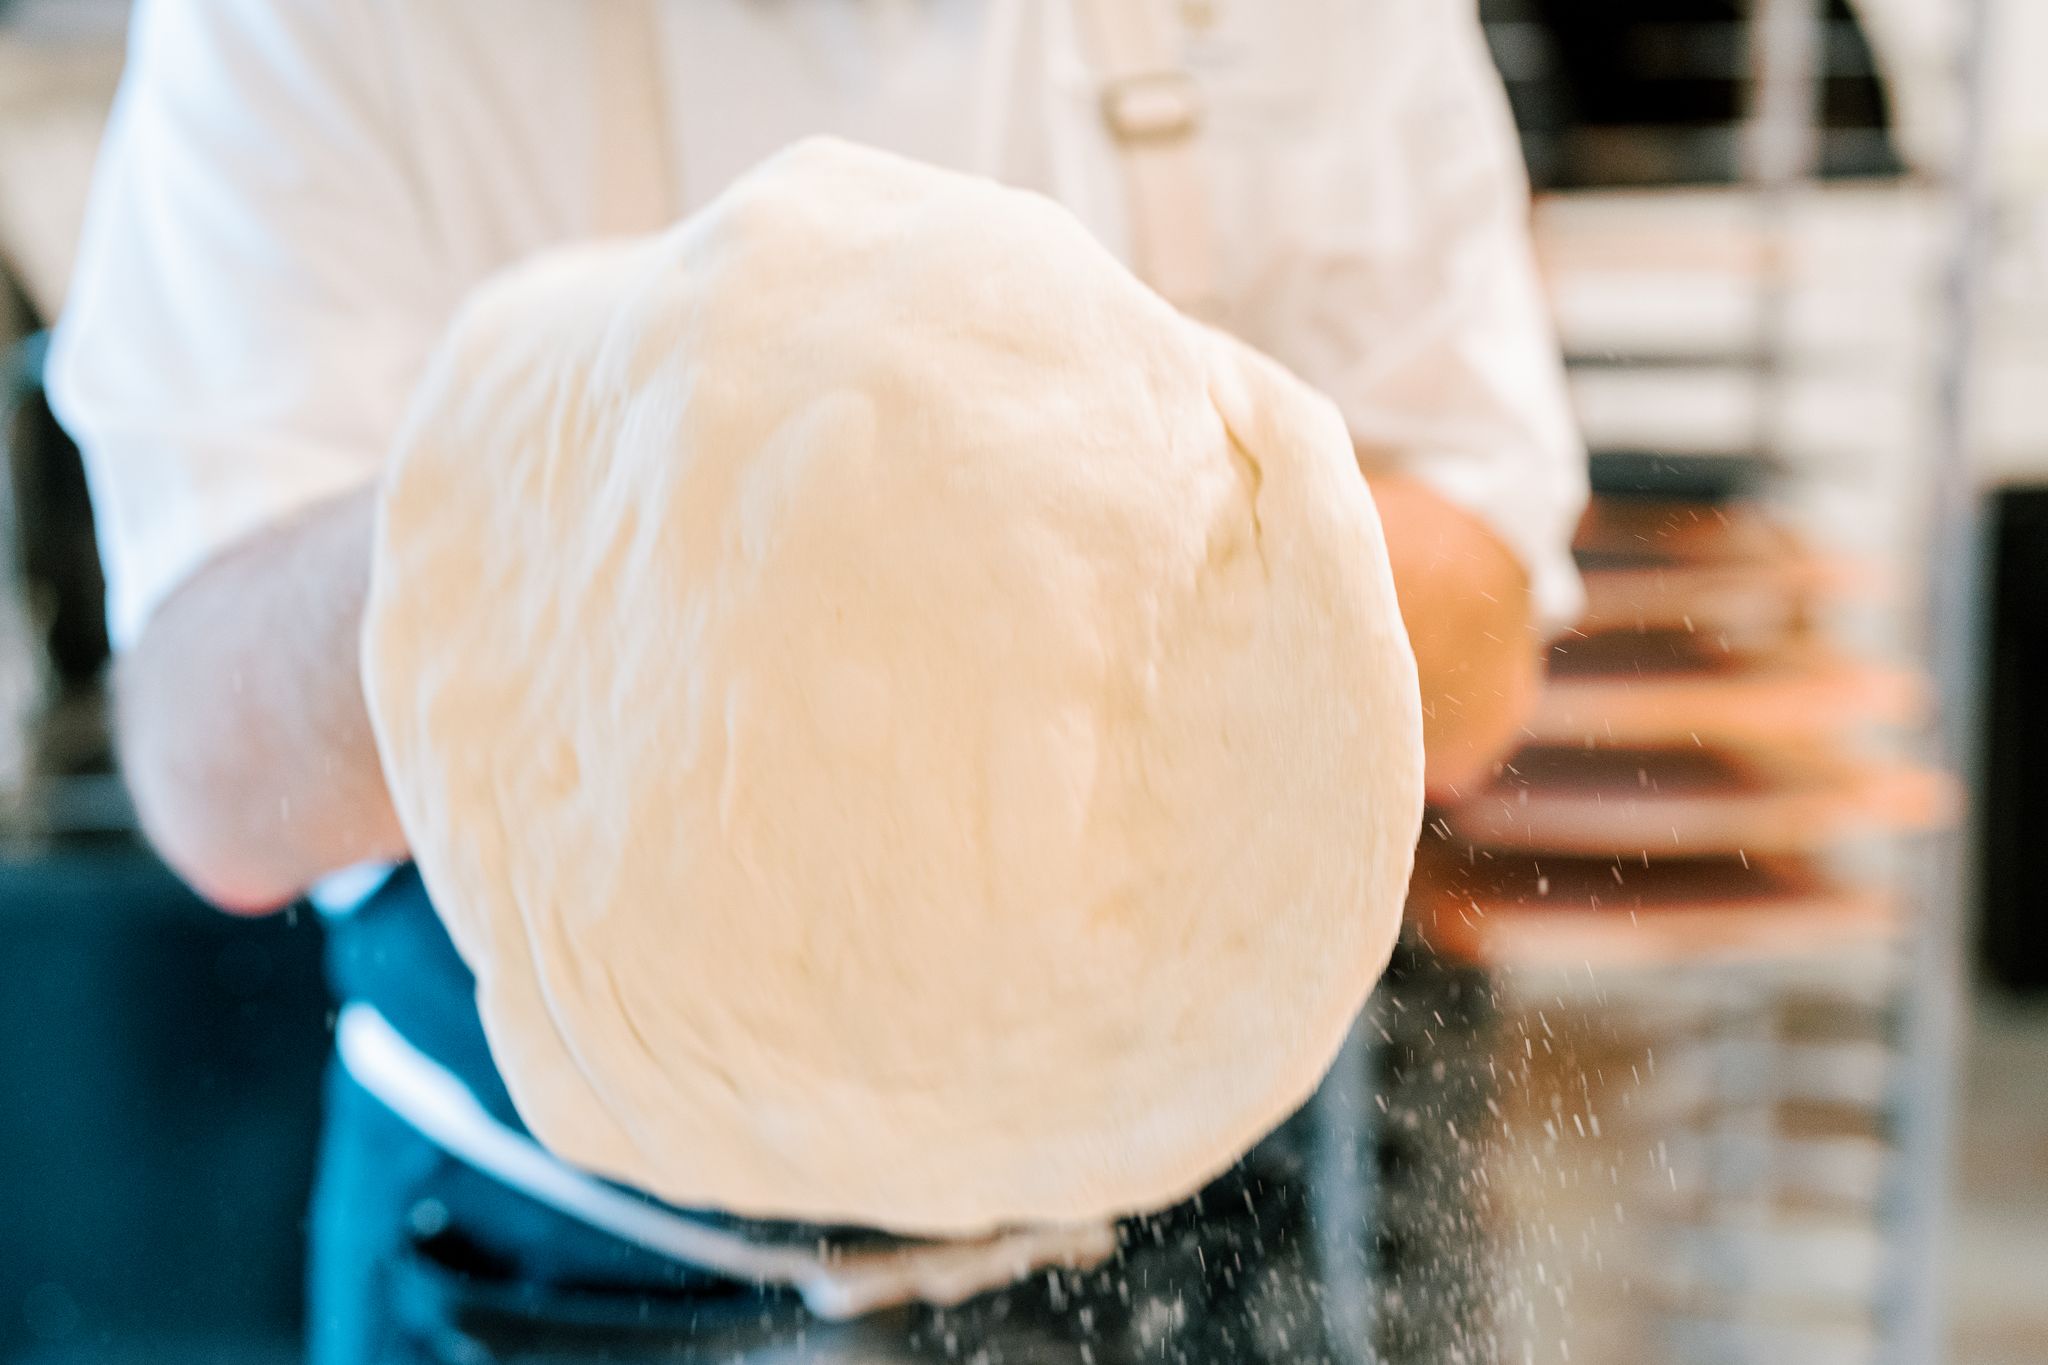 A person wearing a white shirt and apron is holding up a large round piece of pizza dough with both hands. The dough is being stretched and appears slightly airborne with motion blur. The background shows a kitchen environment. Fearrington Village